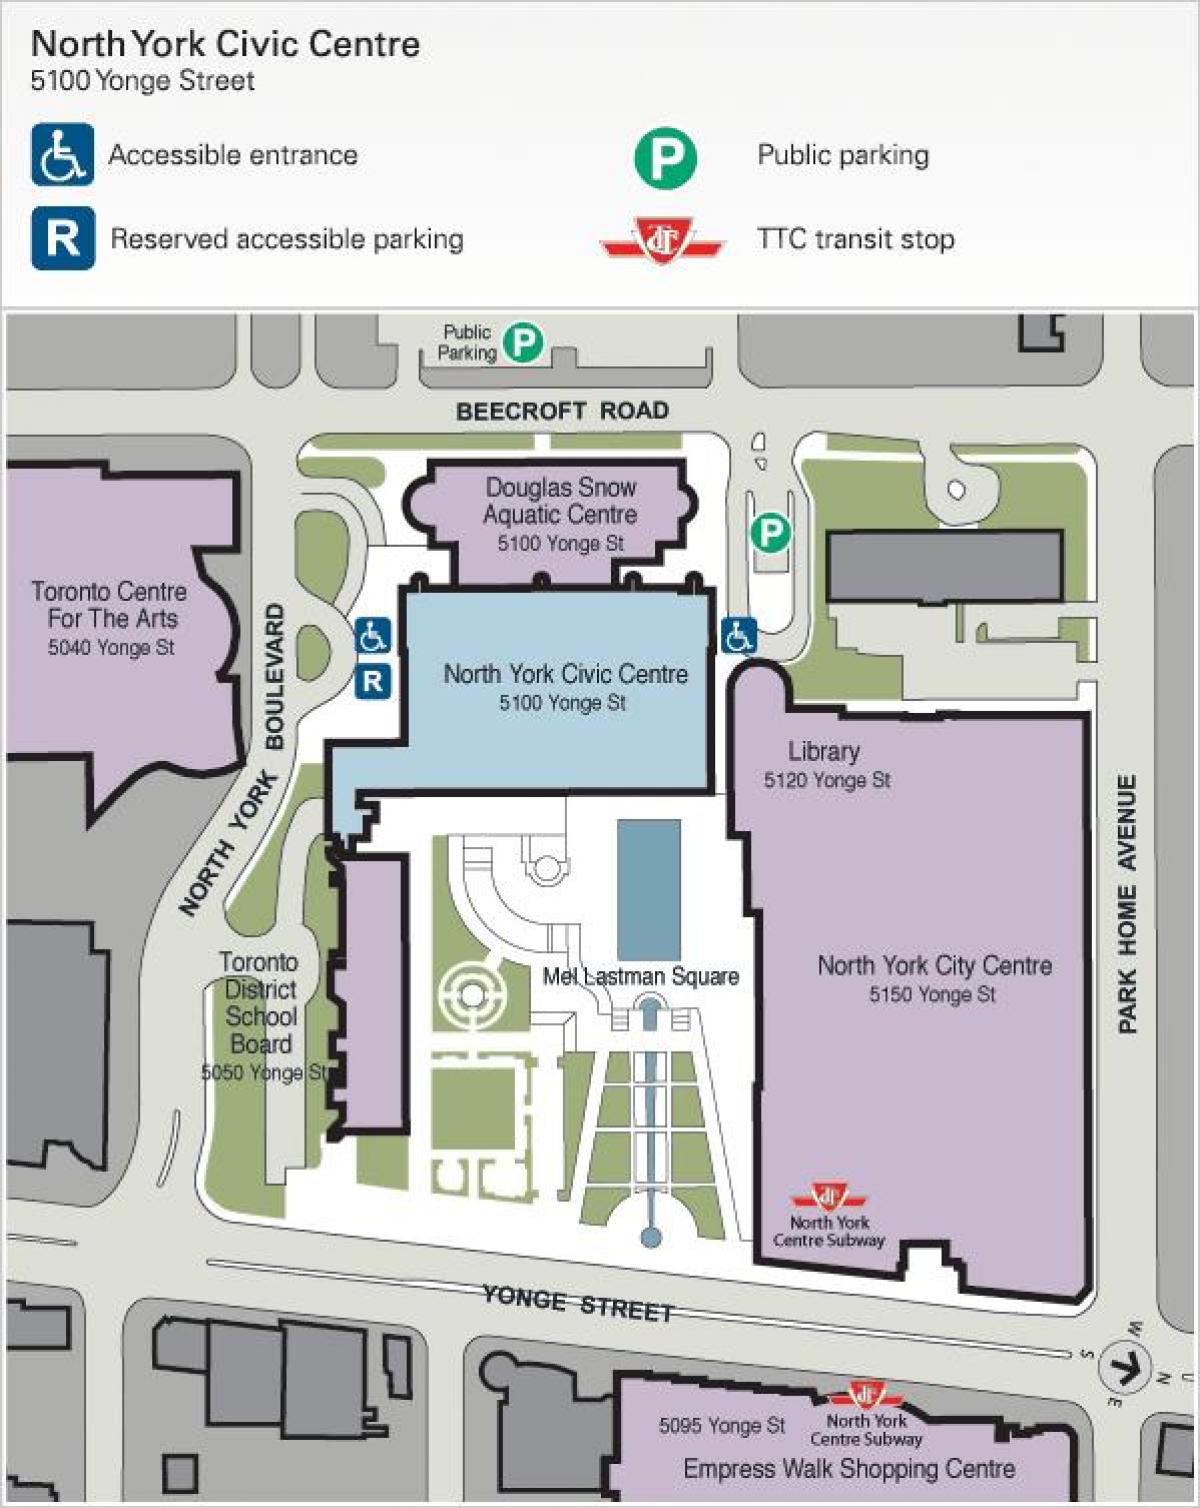 Map of Toronto Centre for the Arts parking